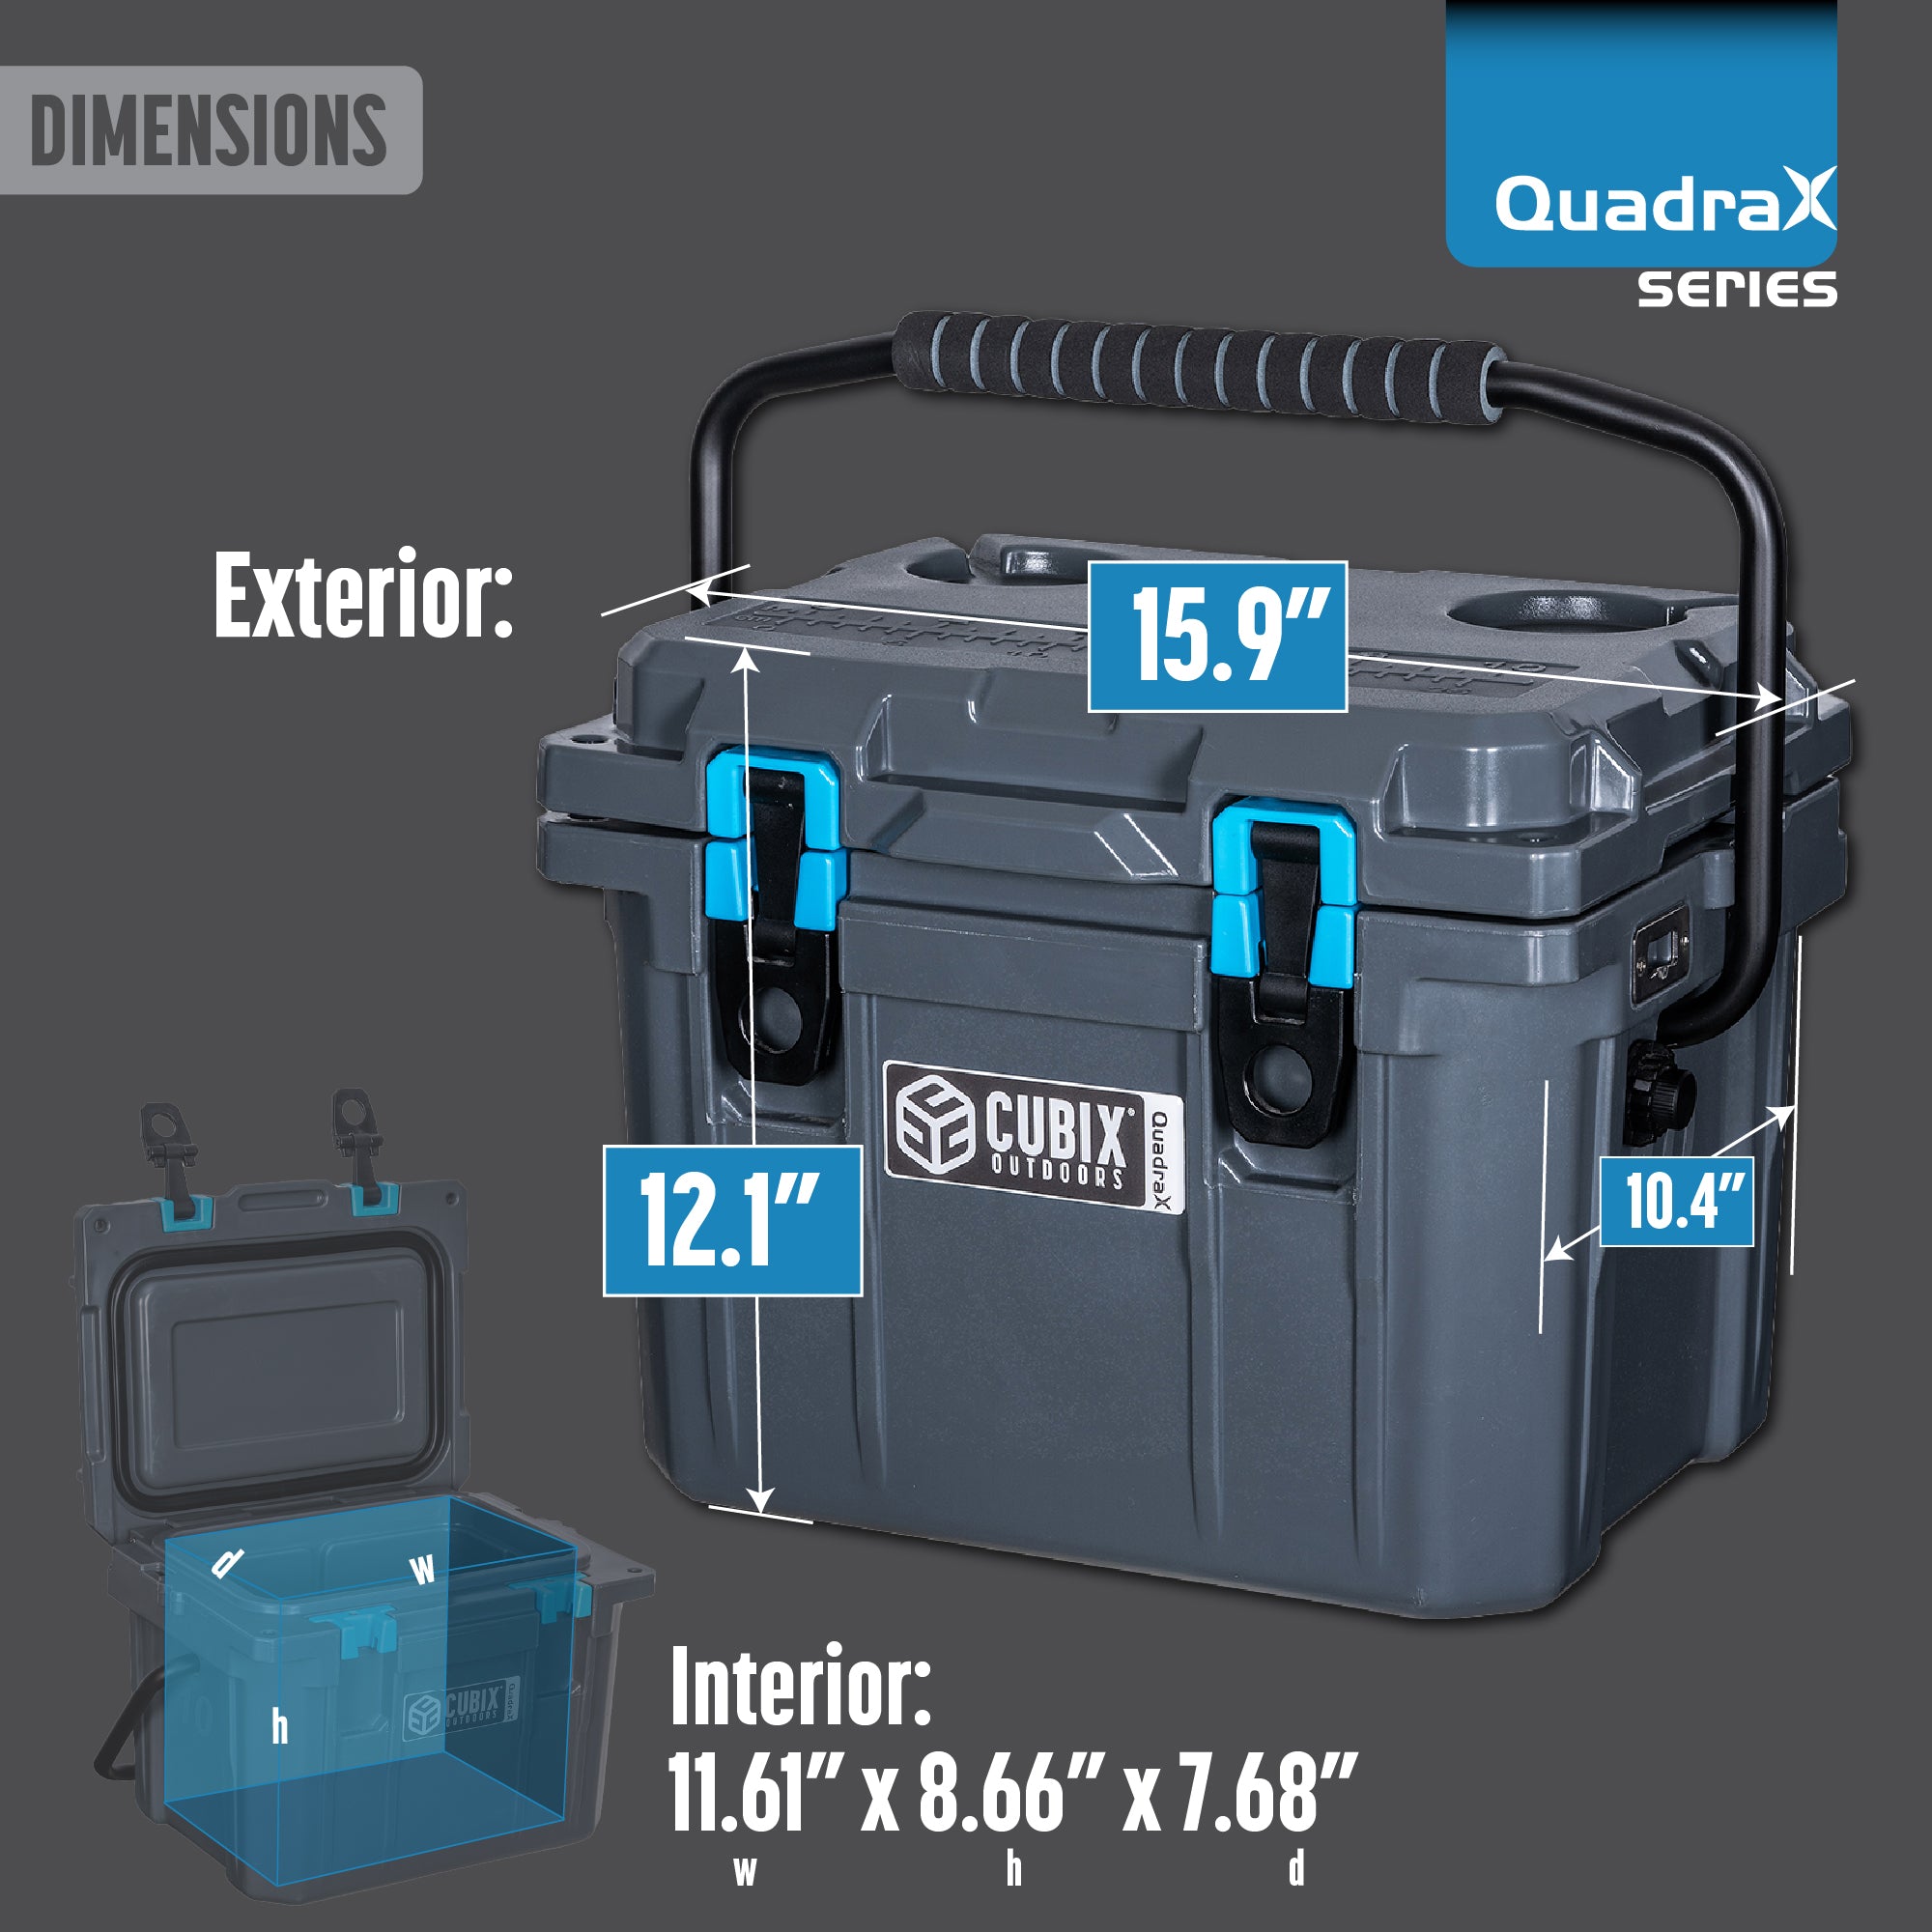 model, Picture with the outer dimensions of the Rotomolded QuadraX cooler